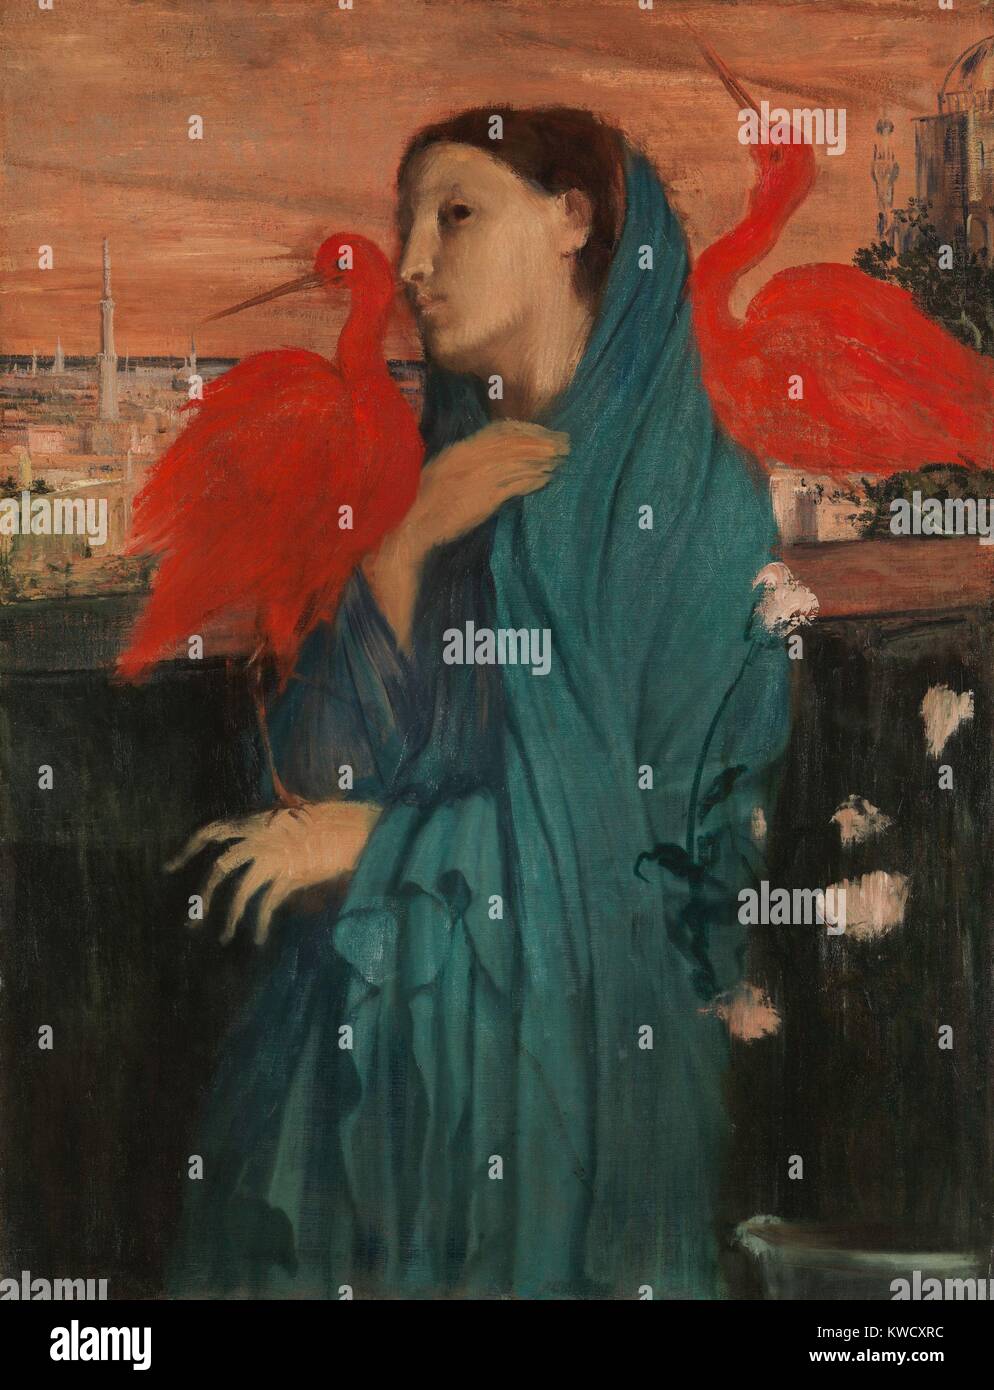 Young Woman with Ibis, by Edgar Degas, 1860-62, French impressionist painting, oil on canvas. Degas added fantasy to his portrait of a woman with imaginary red ibis and a Middle Eastern cityscape (BSLOC 2017 3 96) Stock Photo